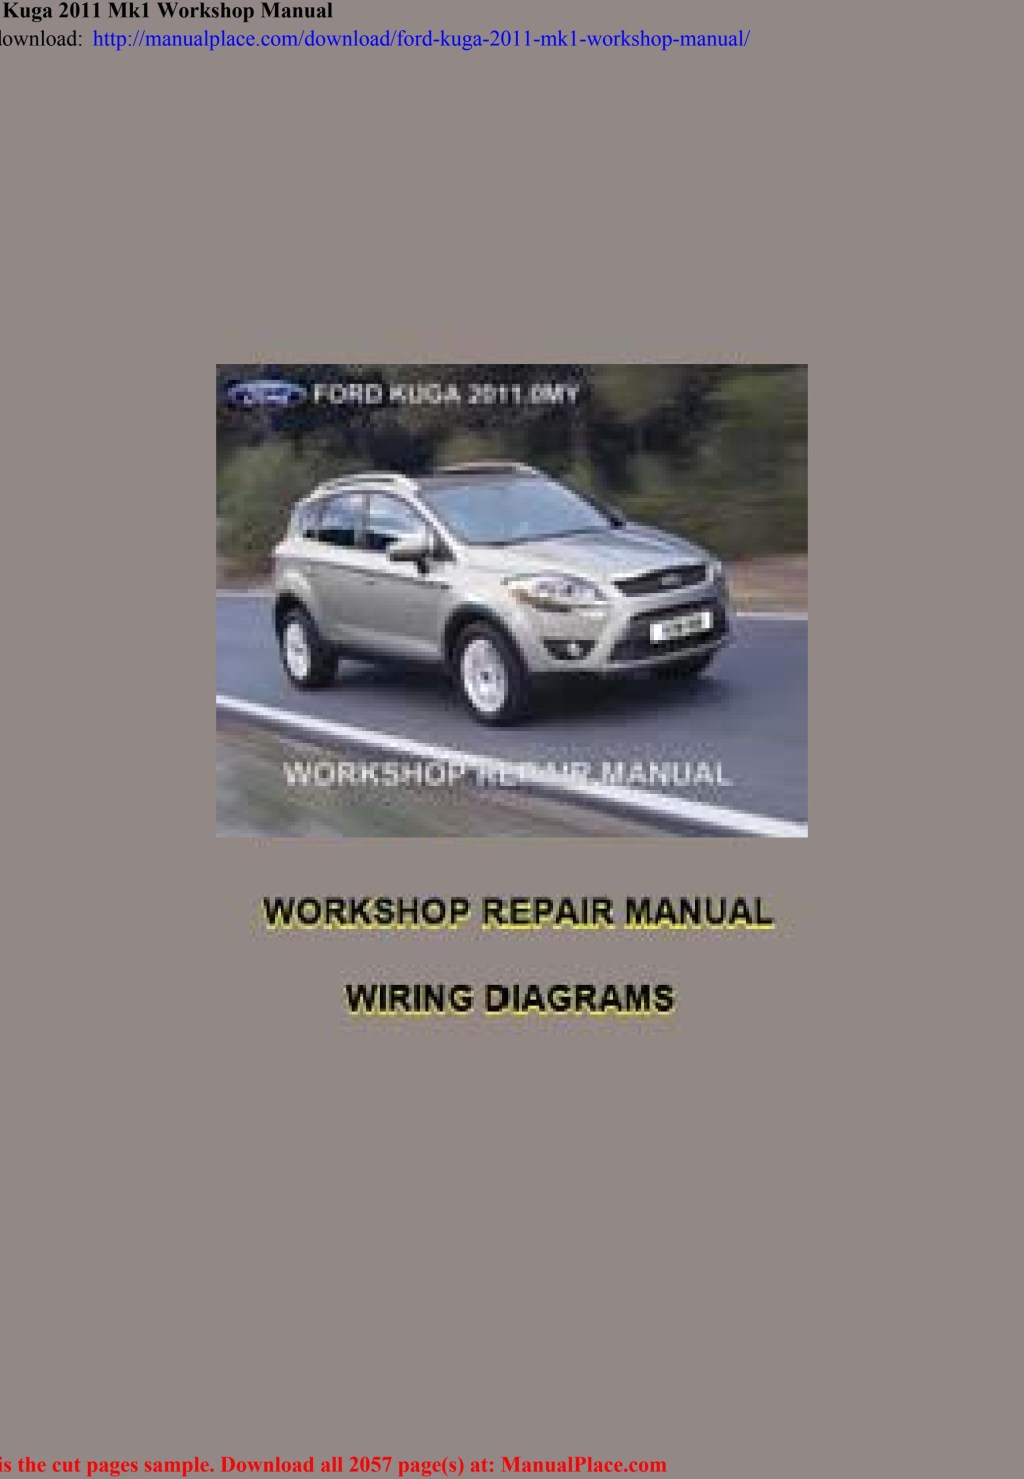 Picture of: Ford Kuga  Mk Workshop Manual by LeslieSpearmanh – Issuu